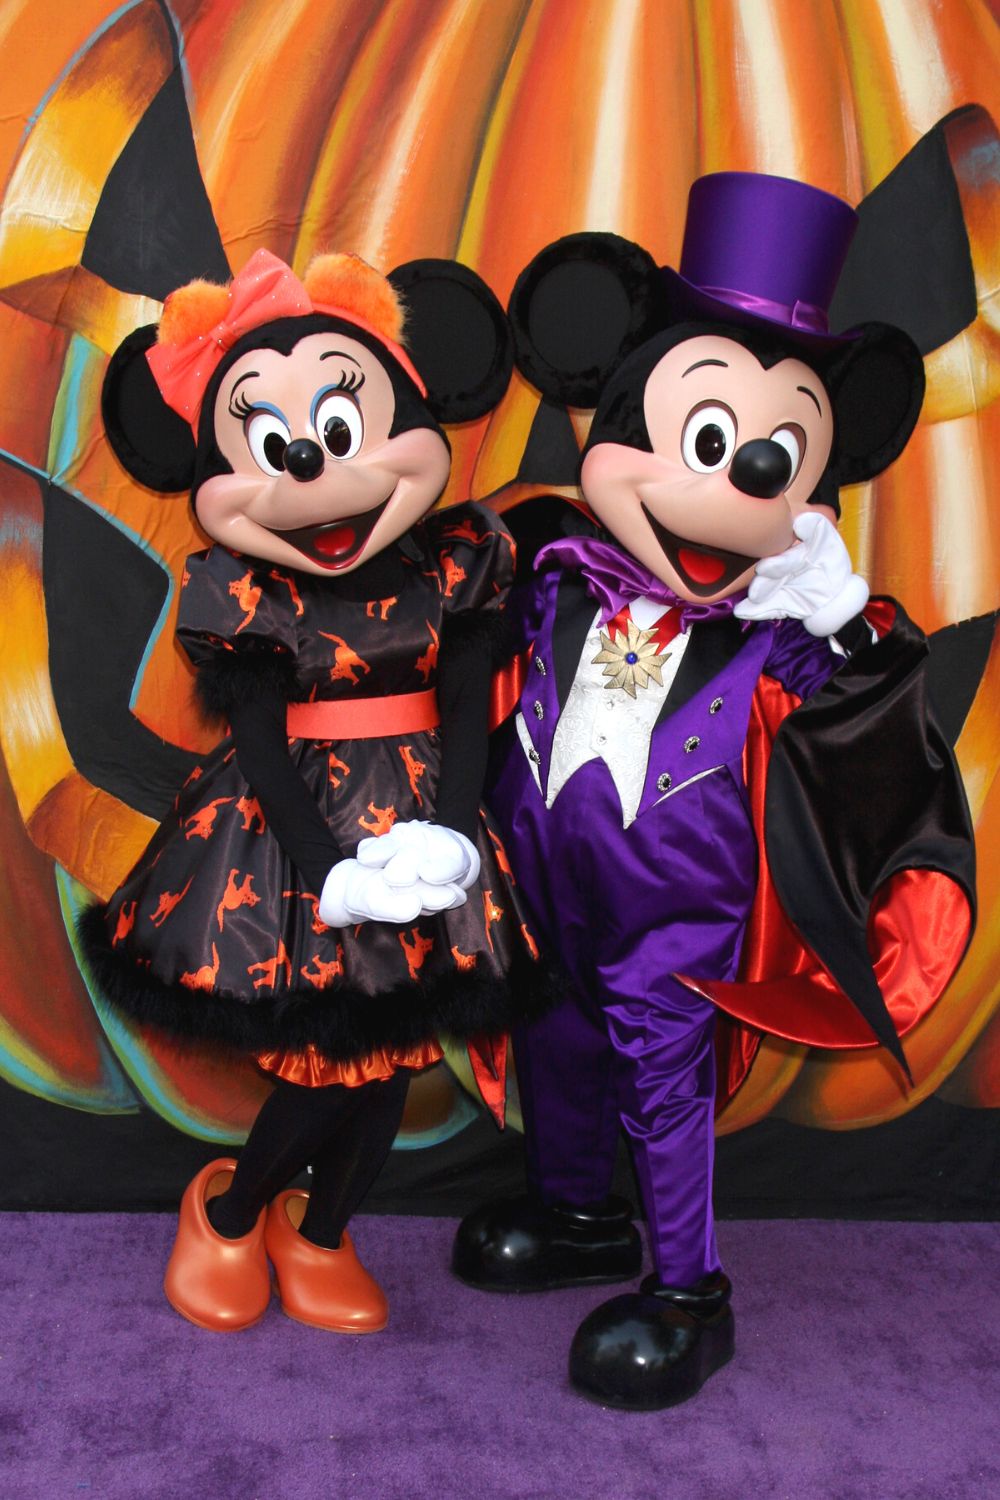 Mickey and Minnie Mouse dressed in Halloween attire at Disney World in October